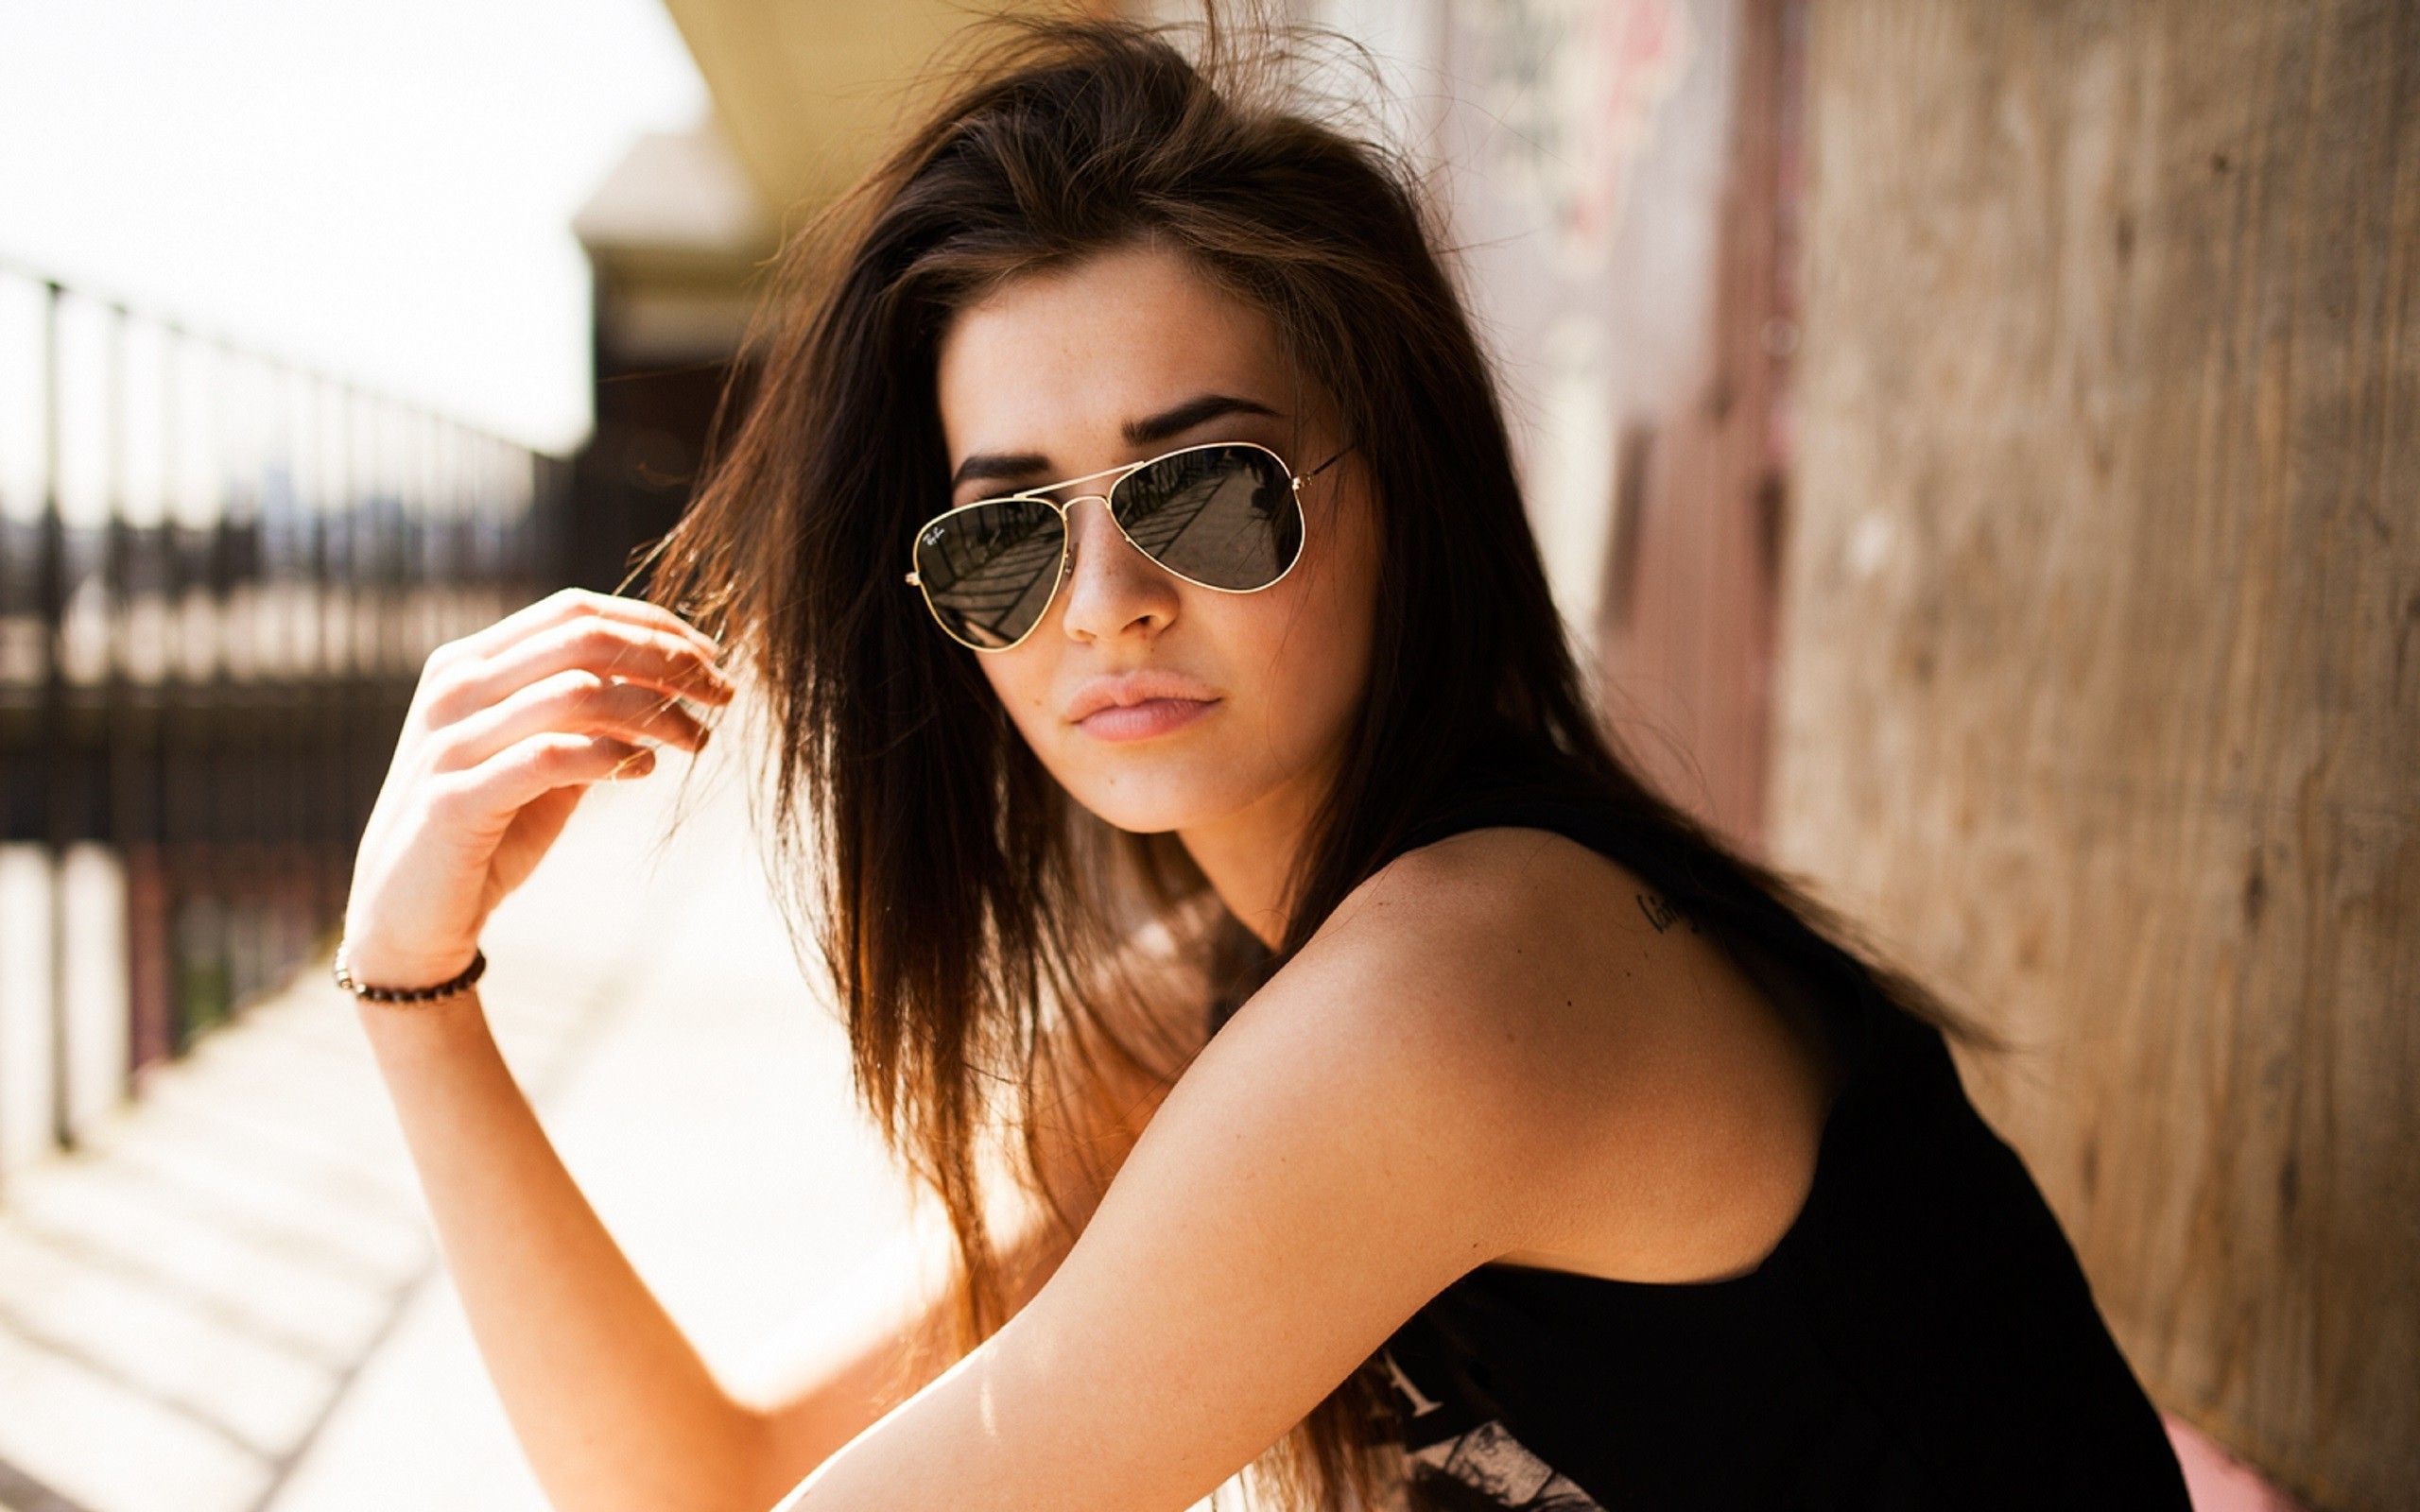 Free photo: Girl with sunglasses, Colorful, Face